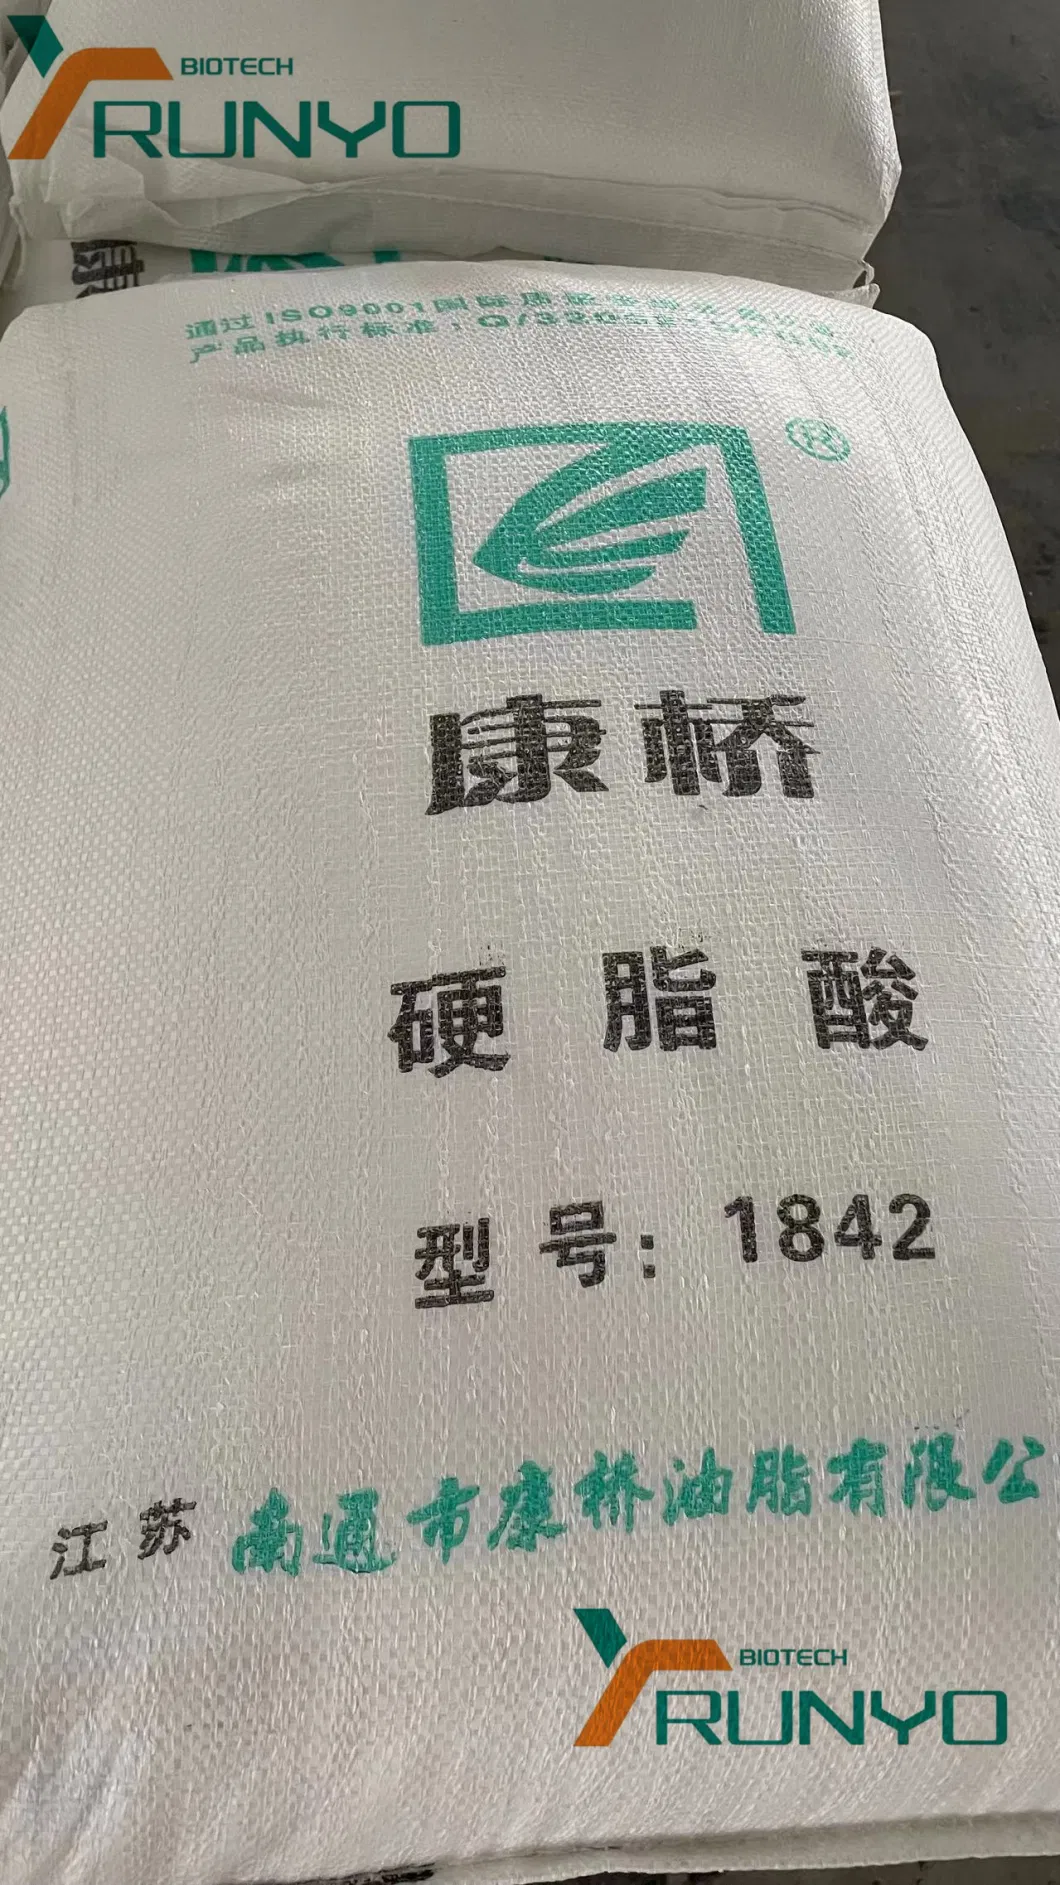 Whosesale Industrial Rubber Grade 40%-60% Powder 1840 1842 1860 Stearic Acid CAS 57-11-4 at a Low Price